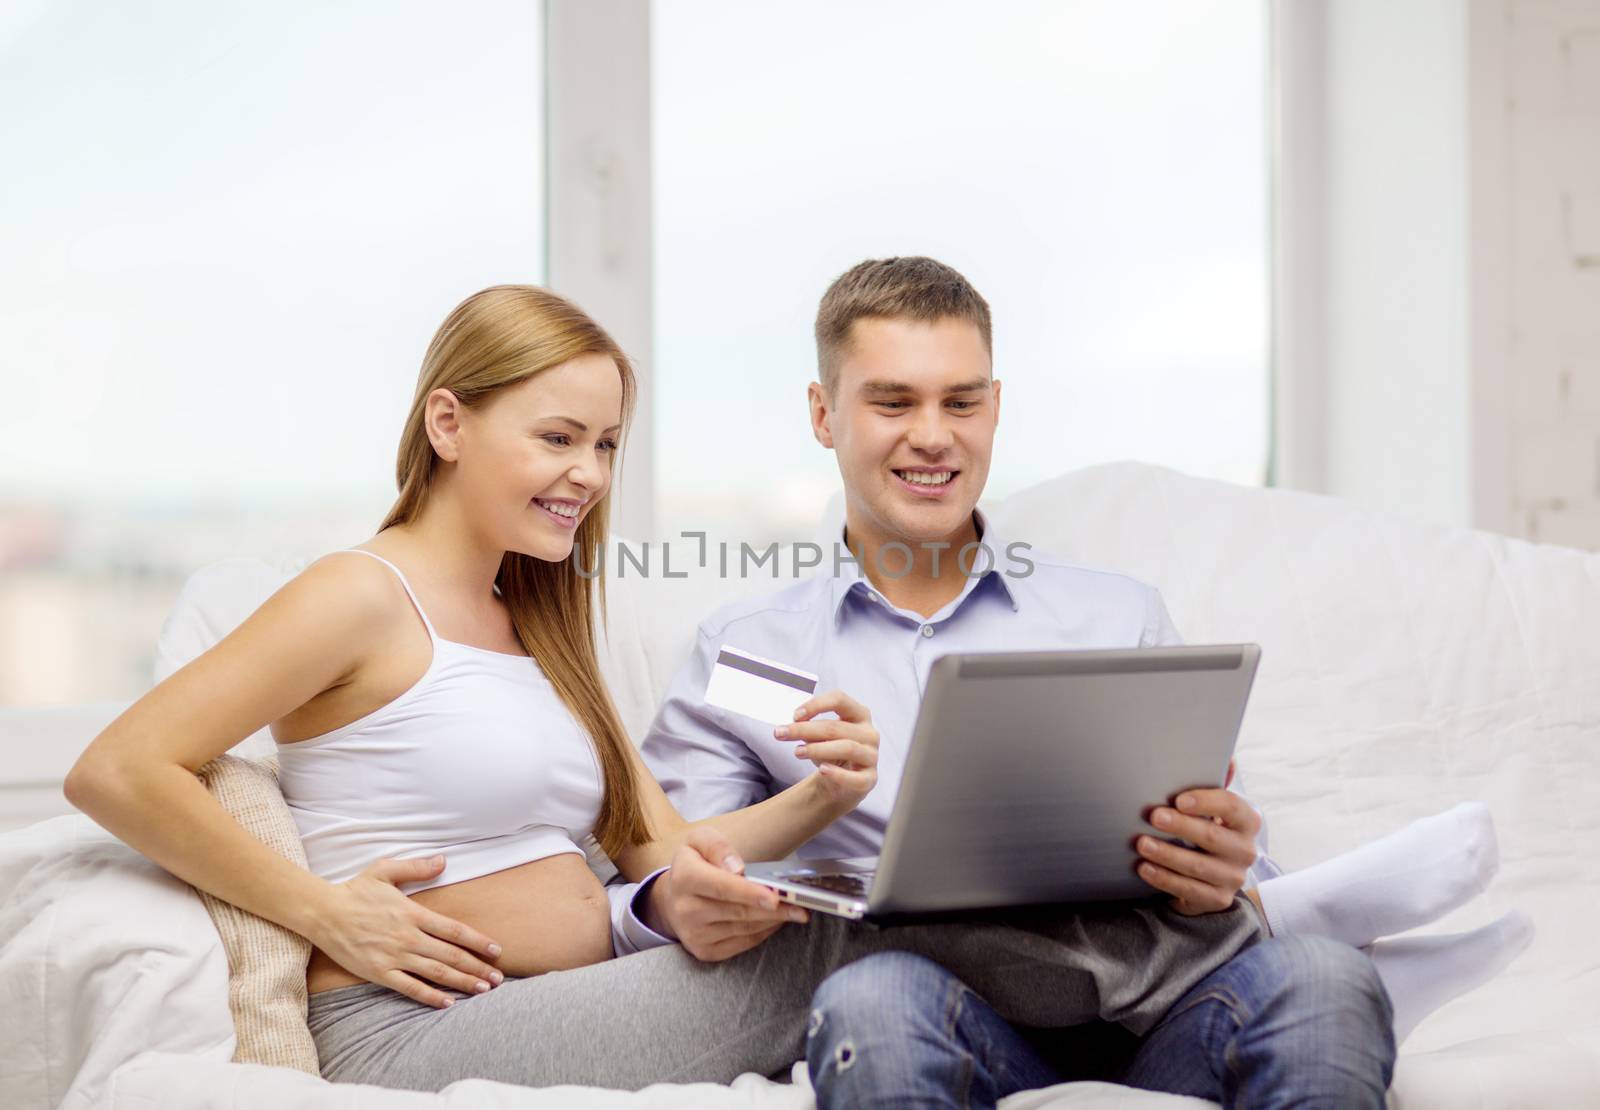 expecting family with laptop and credit card by dolgachov